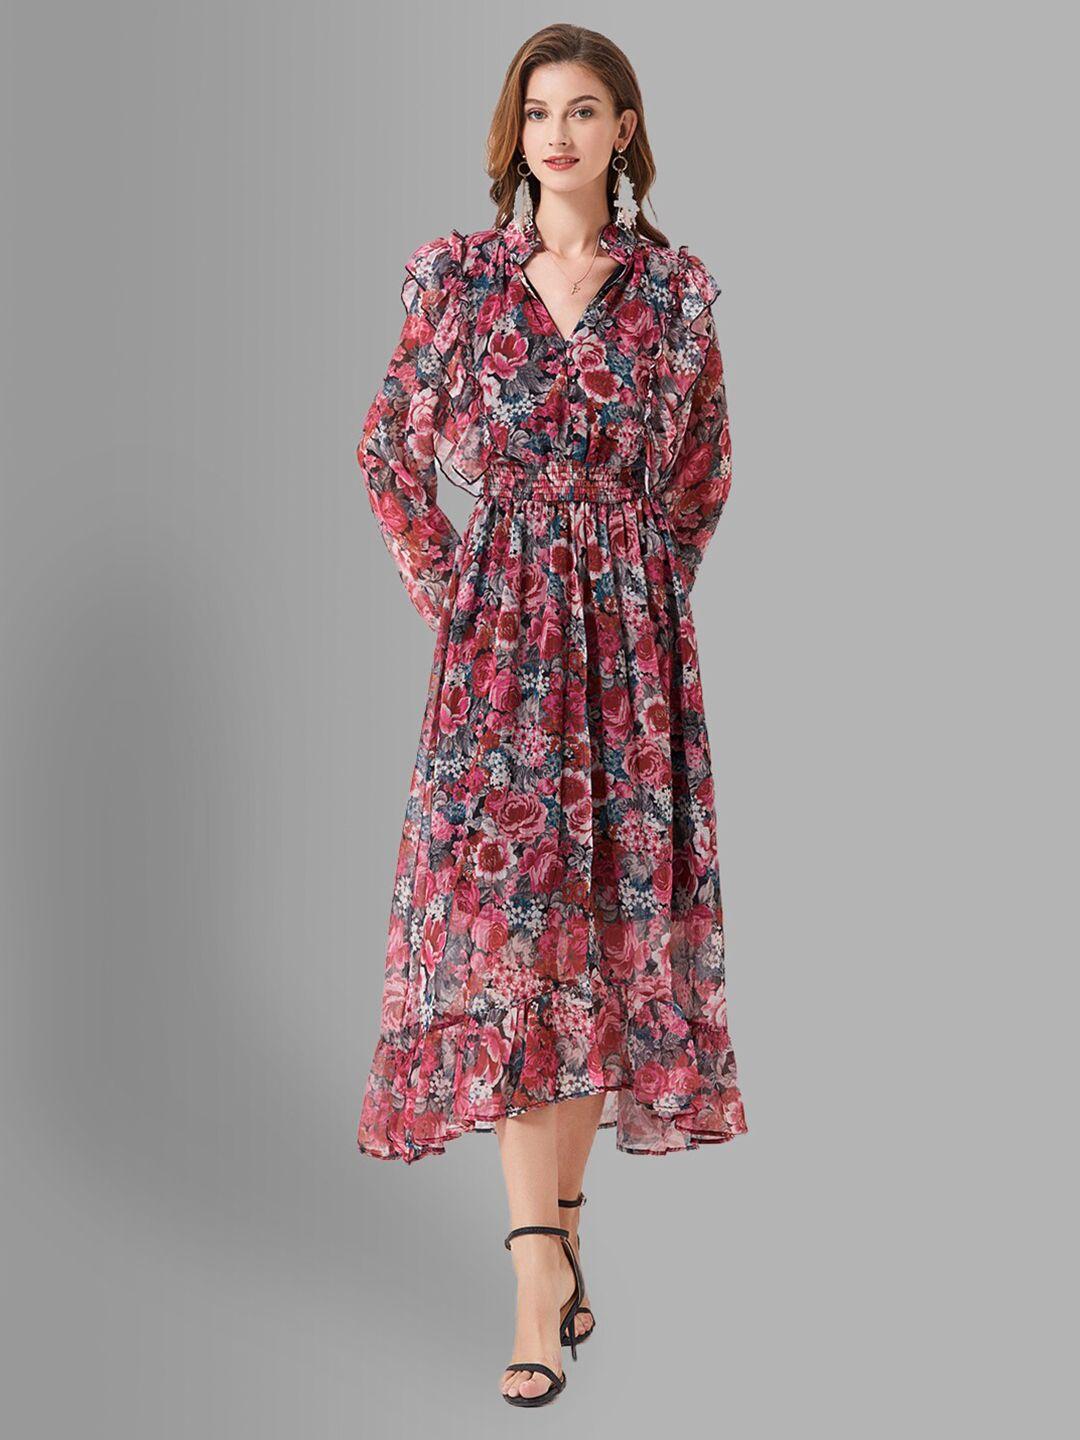 jc collection red floral maxi dress